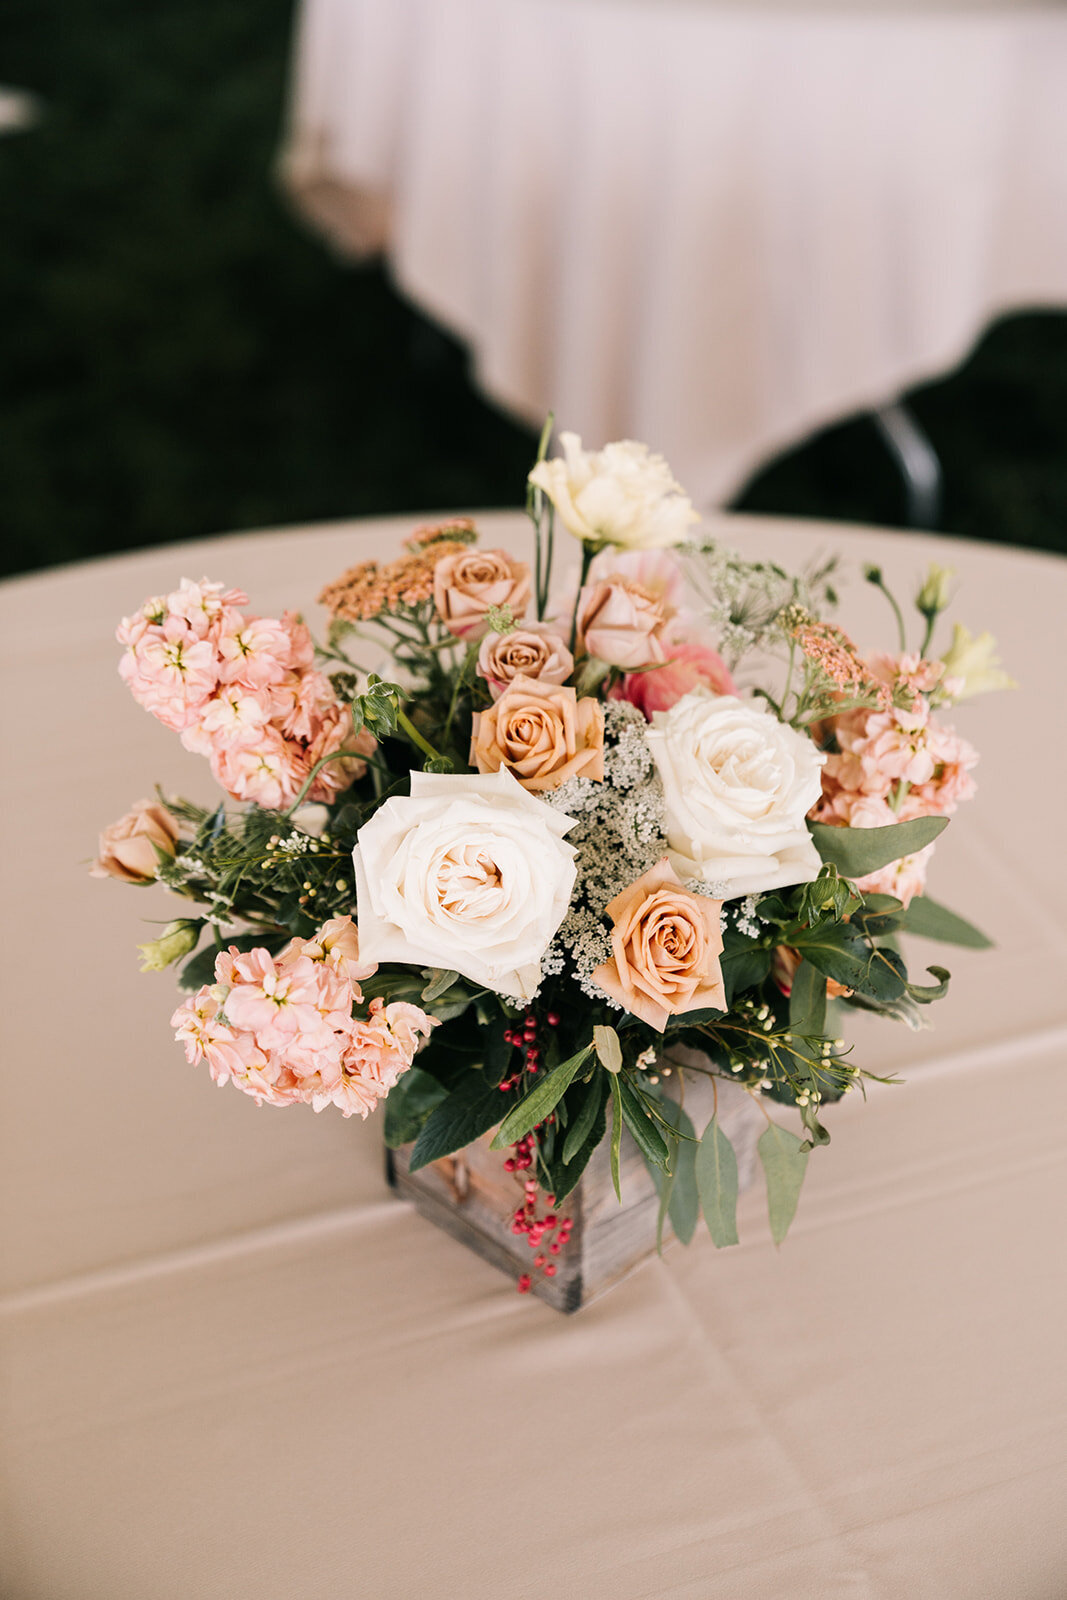 Centerpiece of roses, stock and greenery in aged wooden box